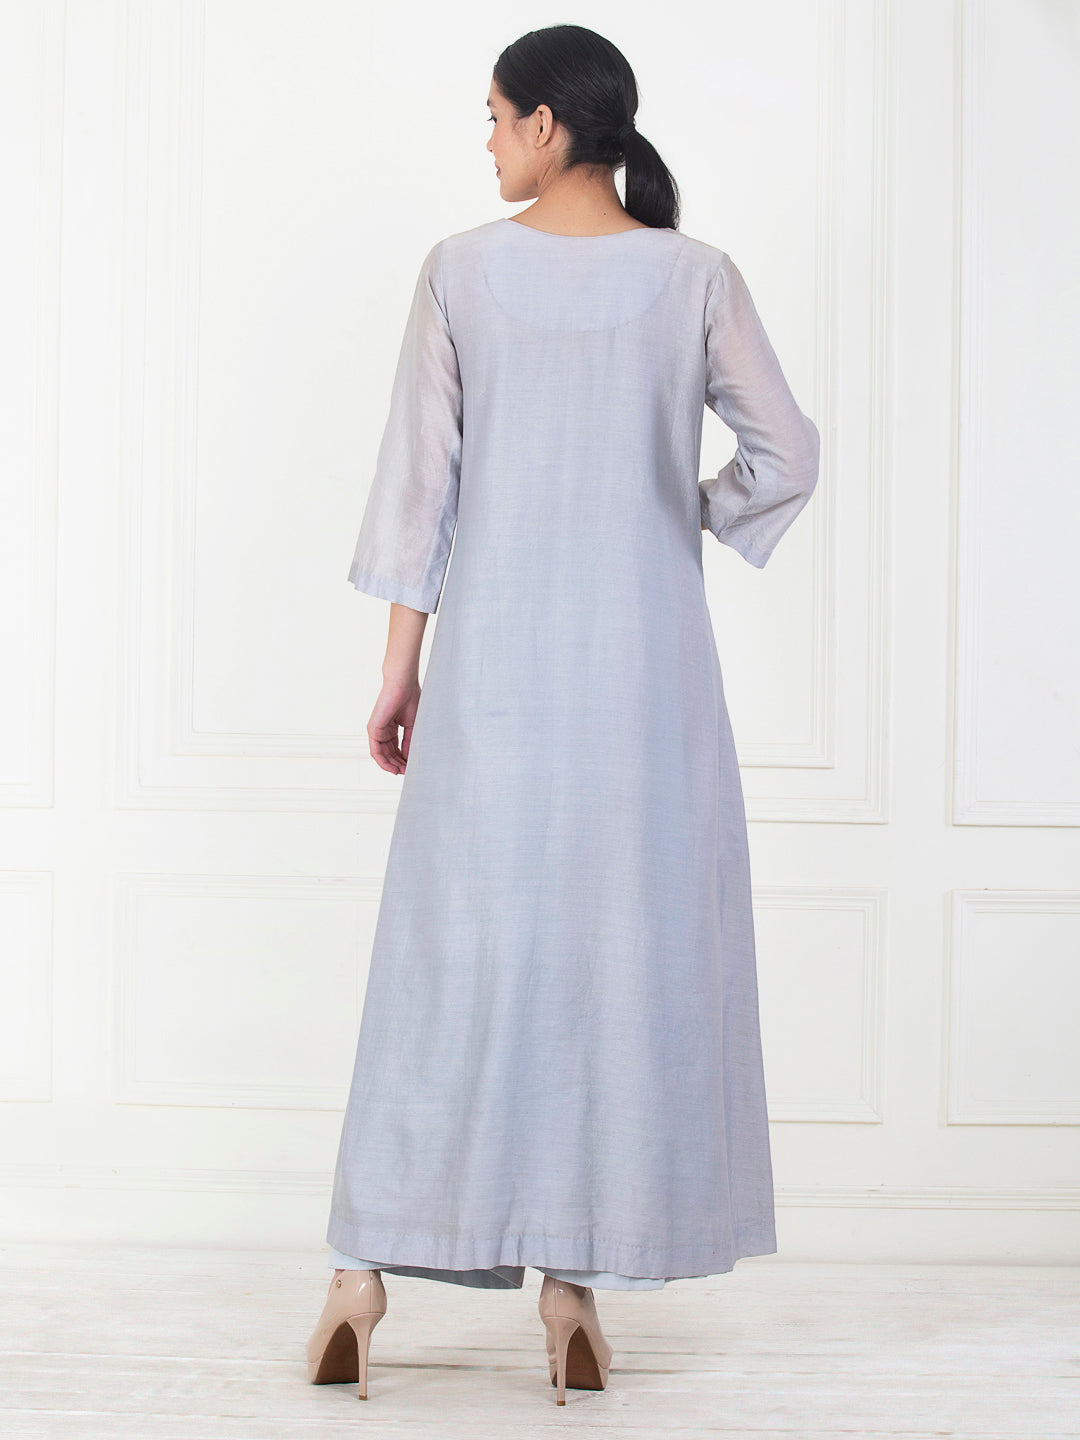 Blue cotton silk kurta that is embroidered from the neck till the waist